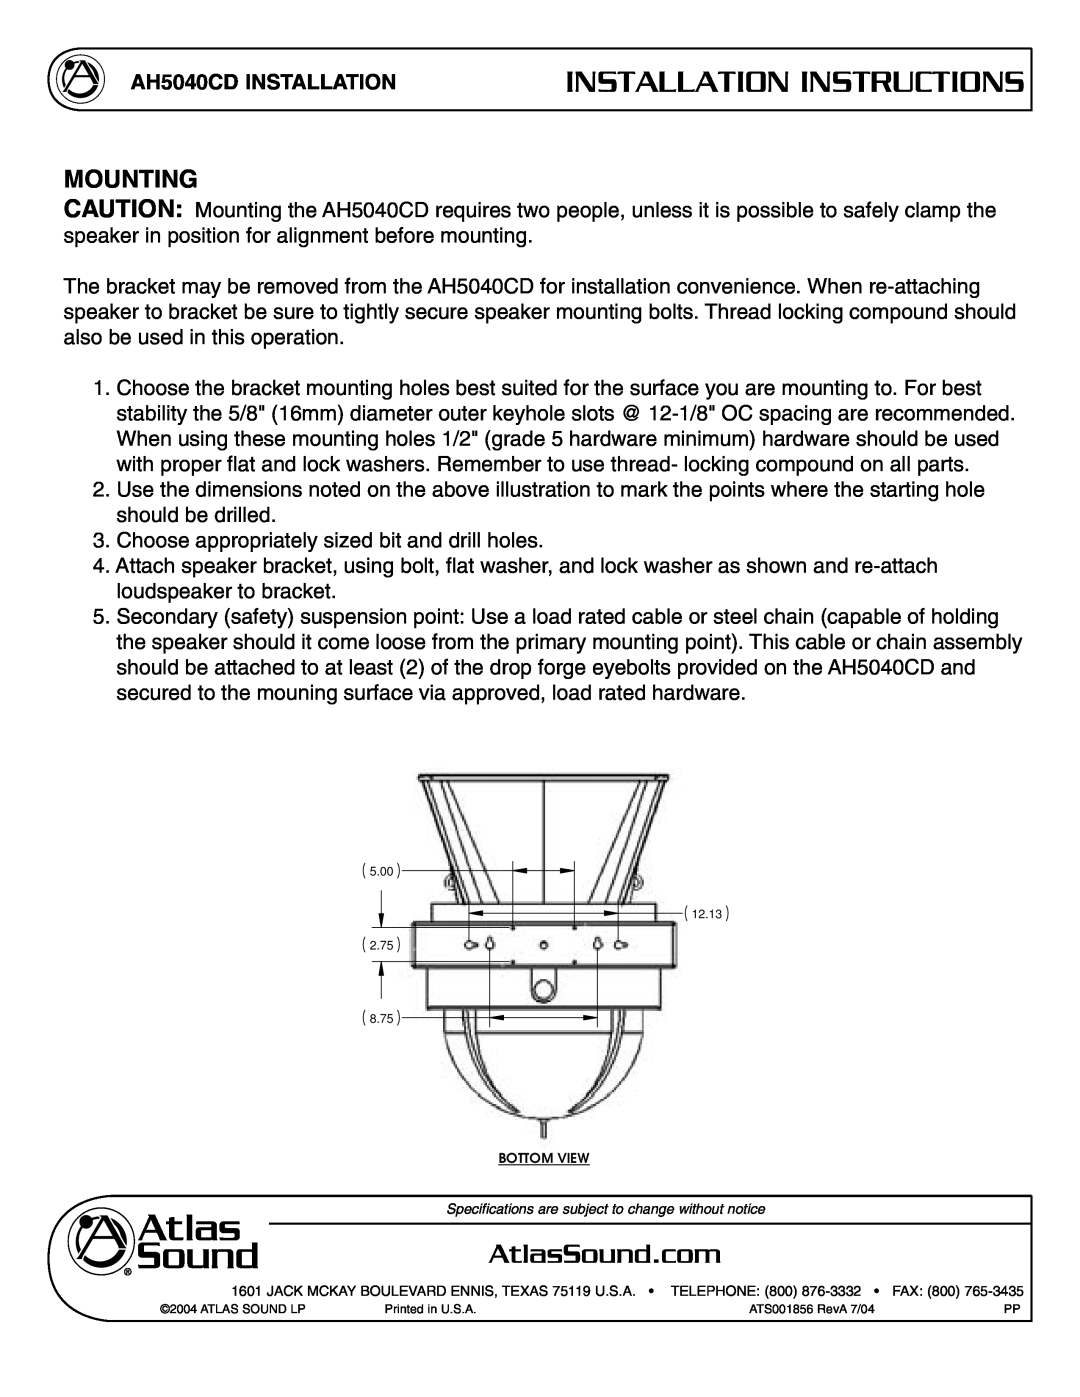 Atlas Sound AH5040CD specifications Mounting, Installation Instructions 